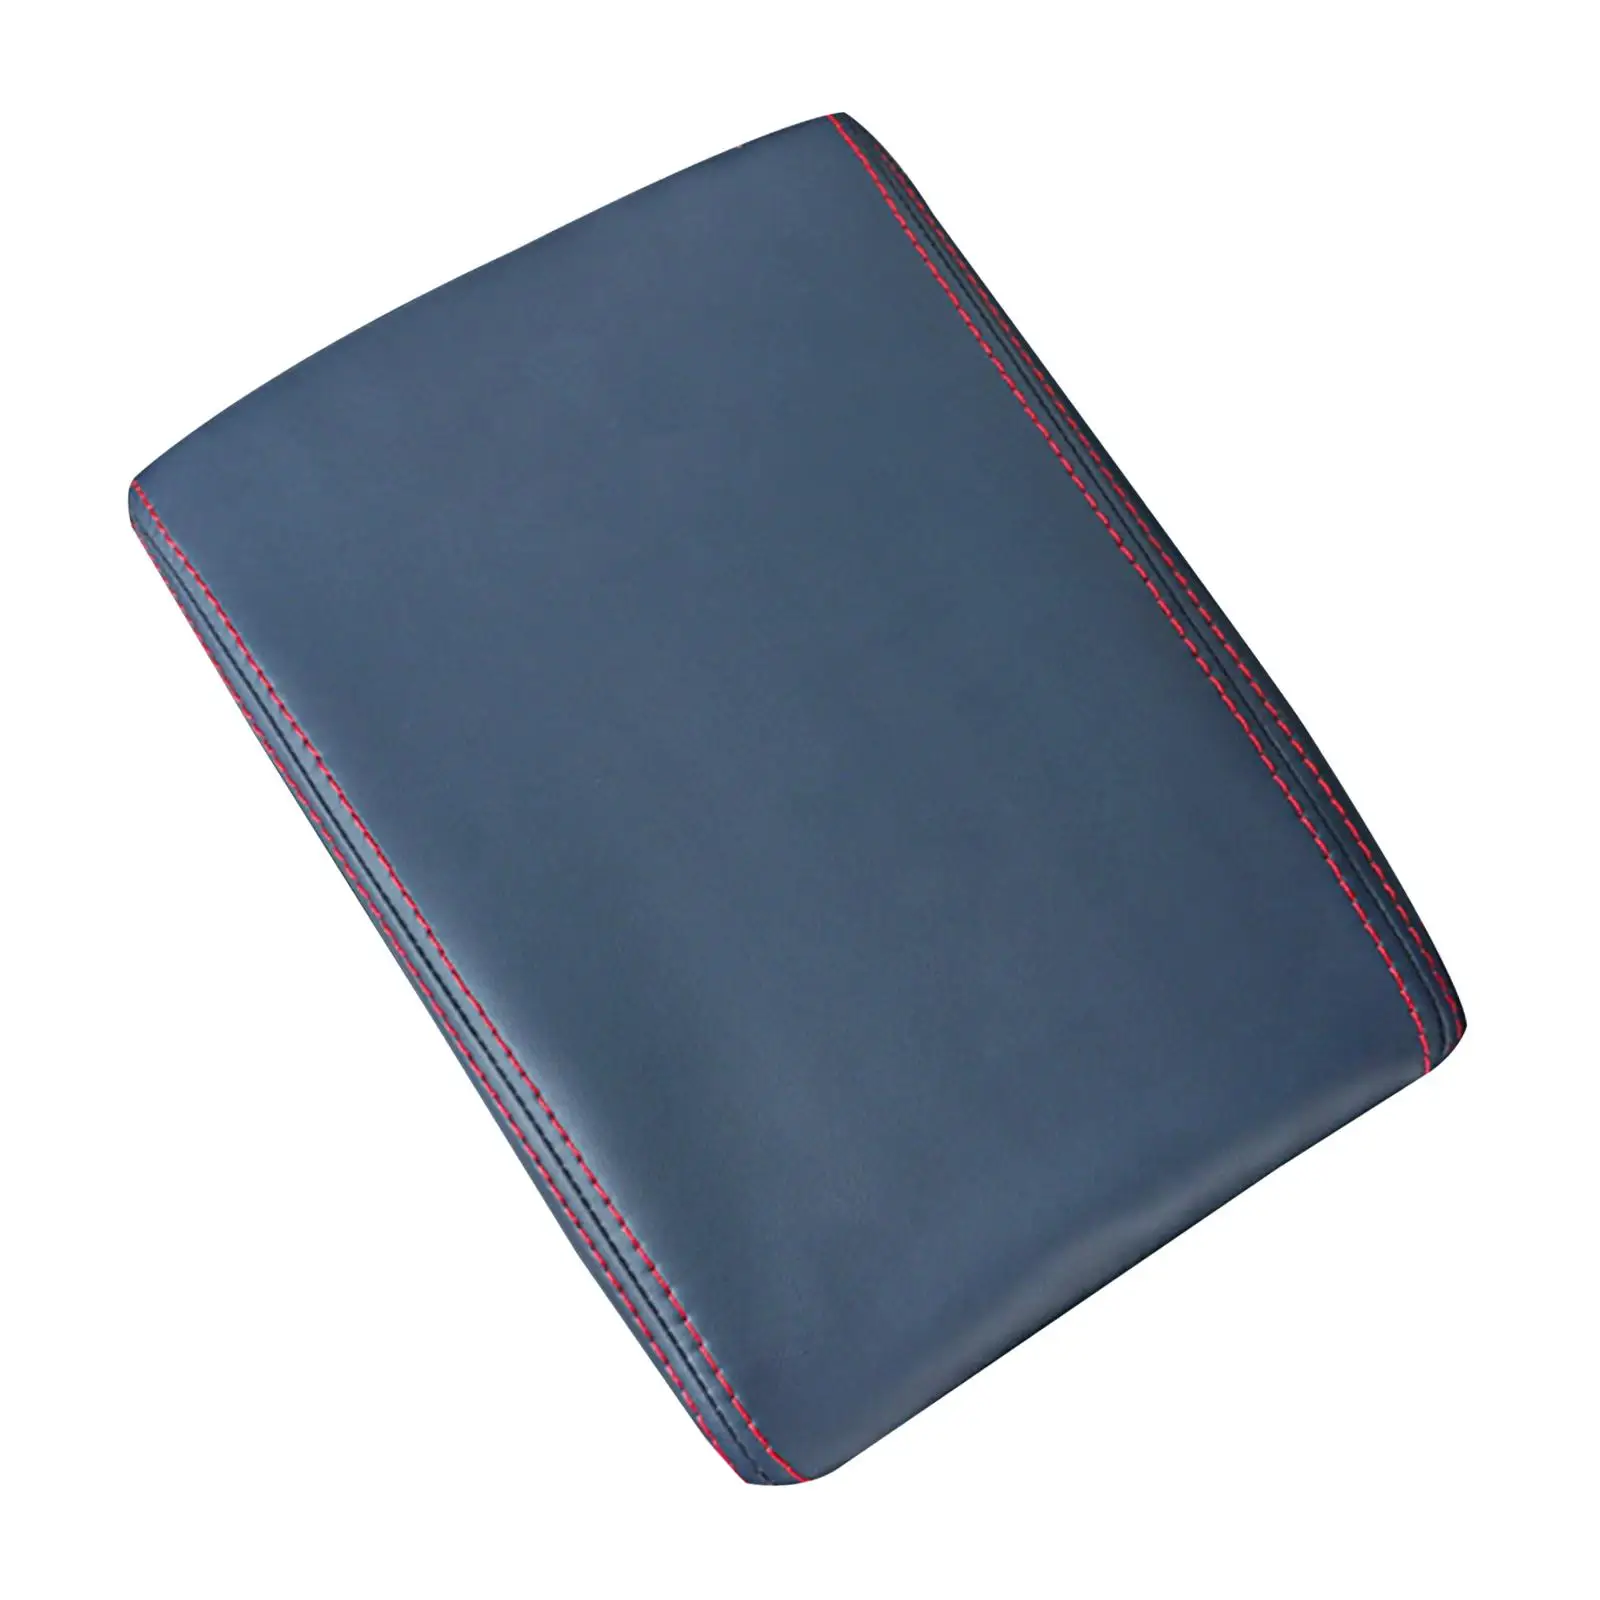 Center Car Armrest Mat PU Leather Waterproof for Protection Cushion Mat